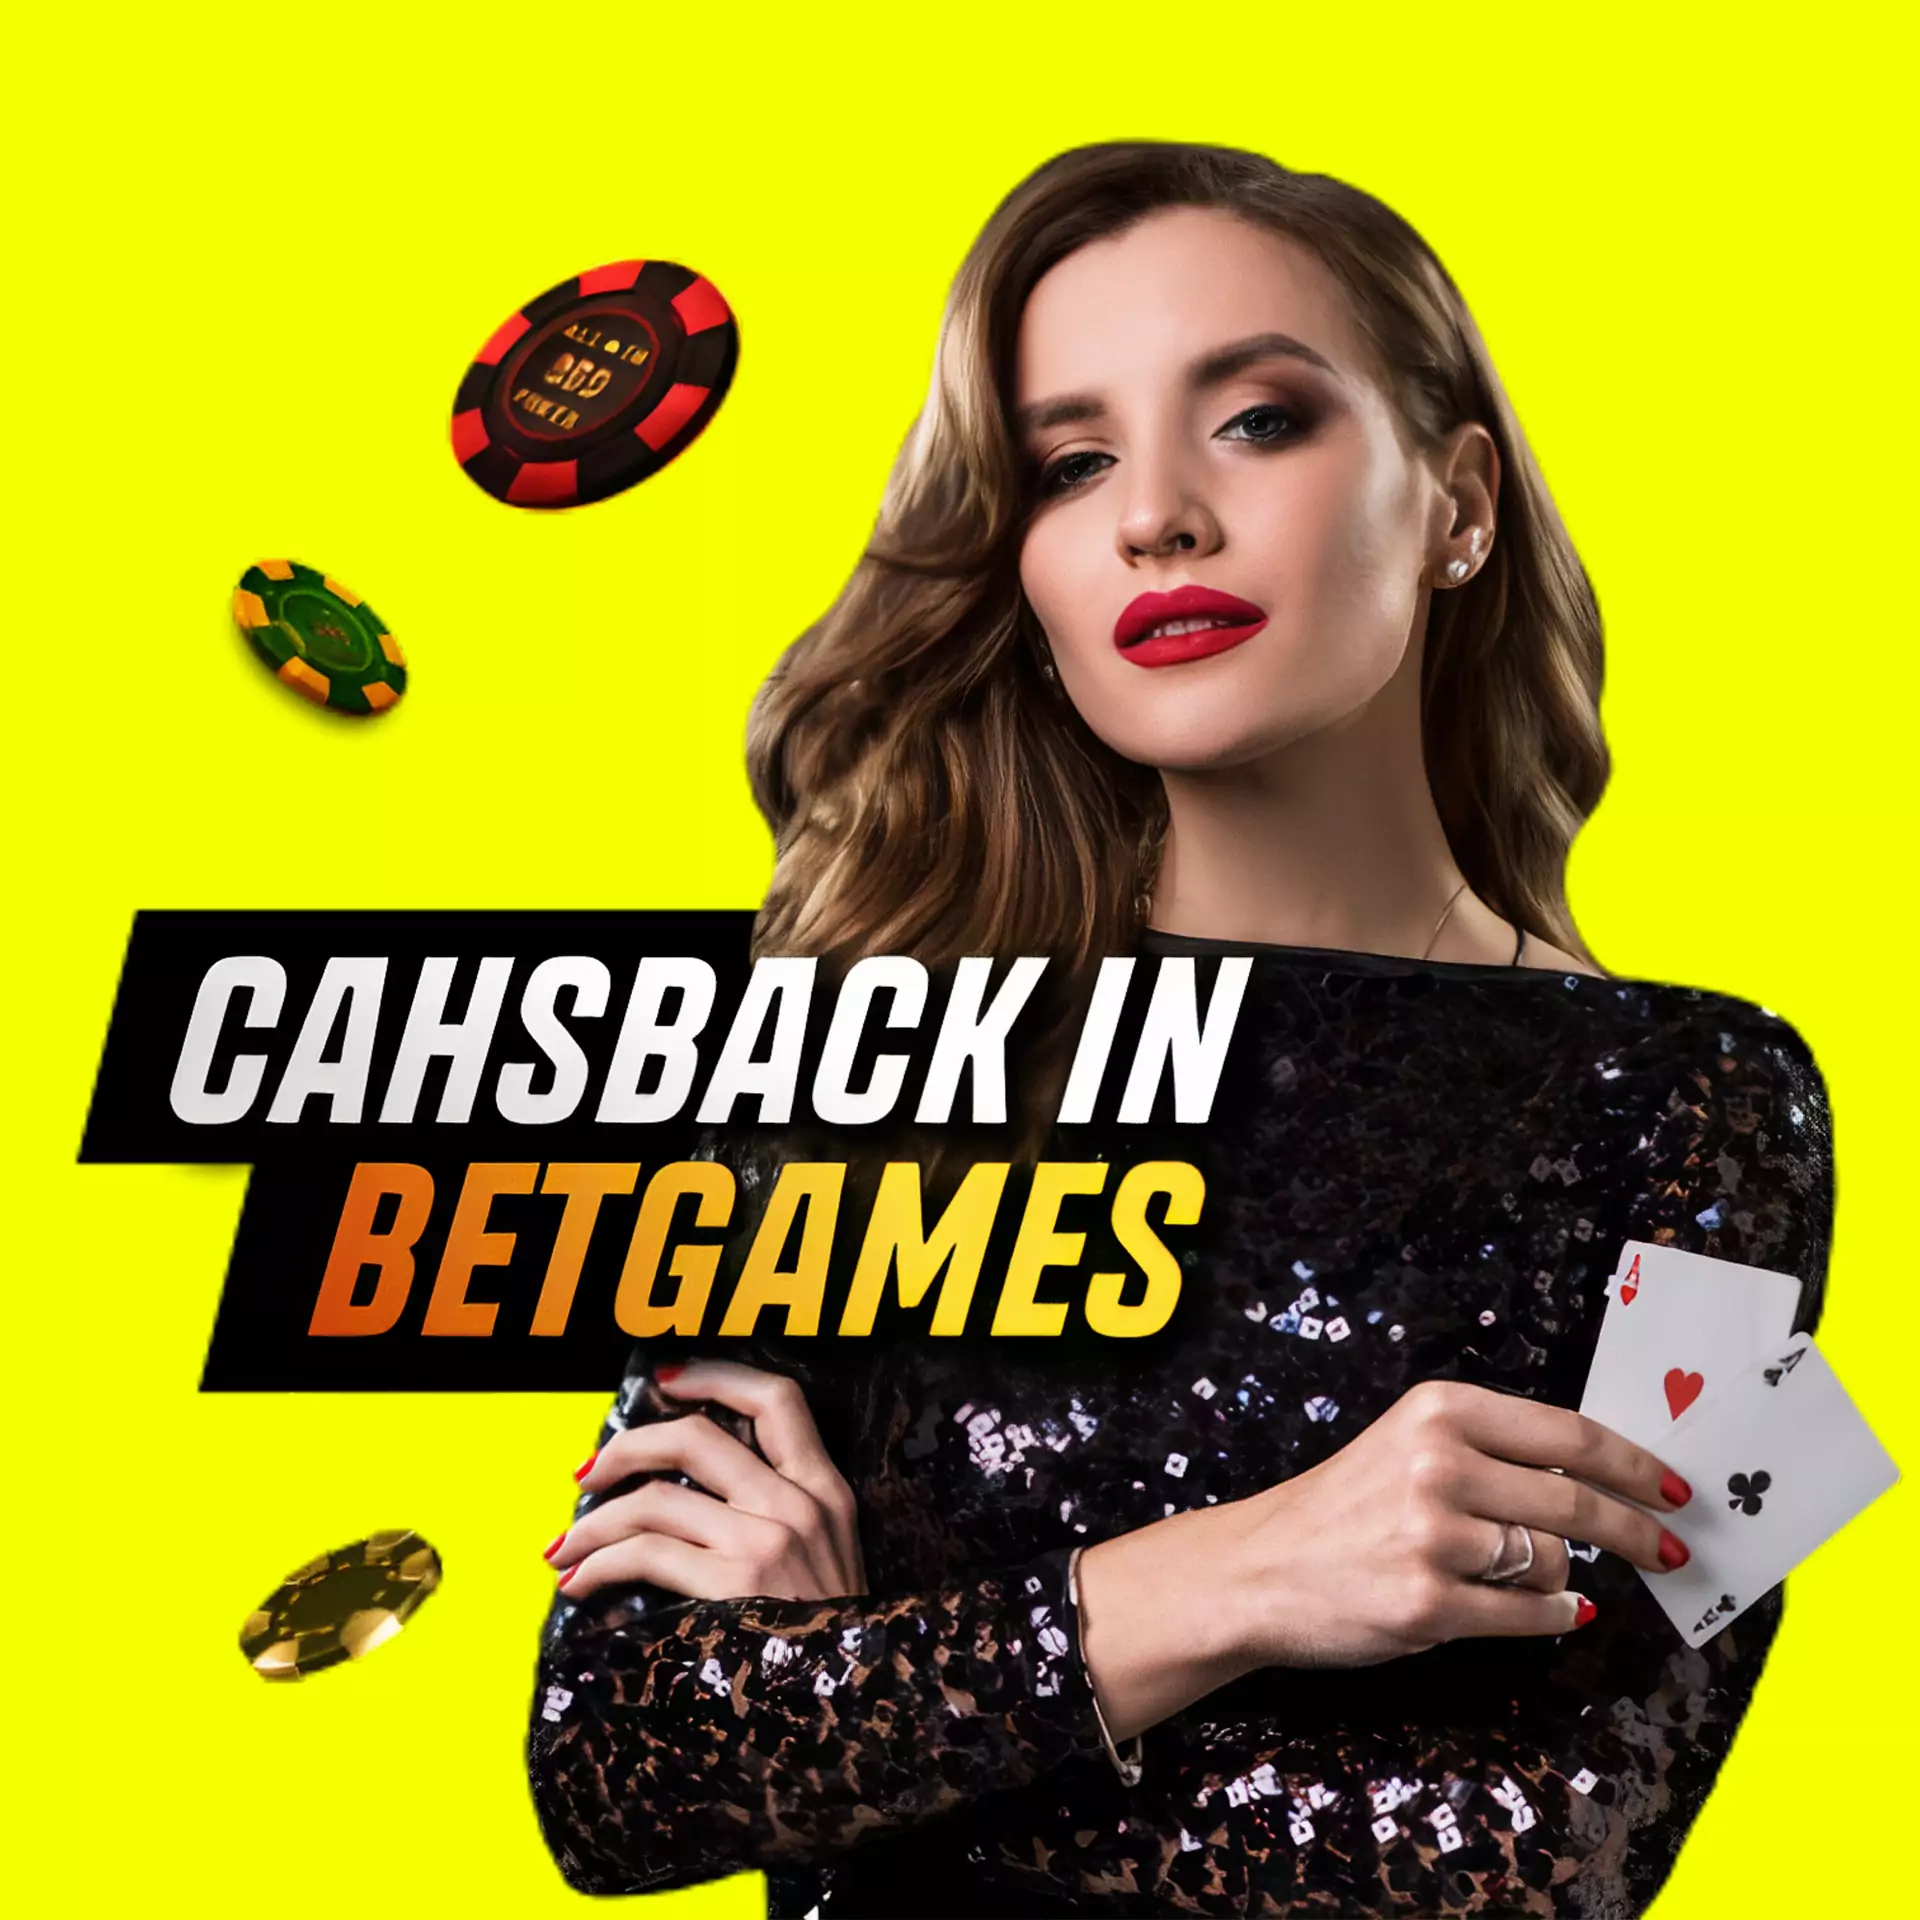 The more money you spend on betting or gamblin, the bigger cashback you'll get from Parimatch.